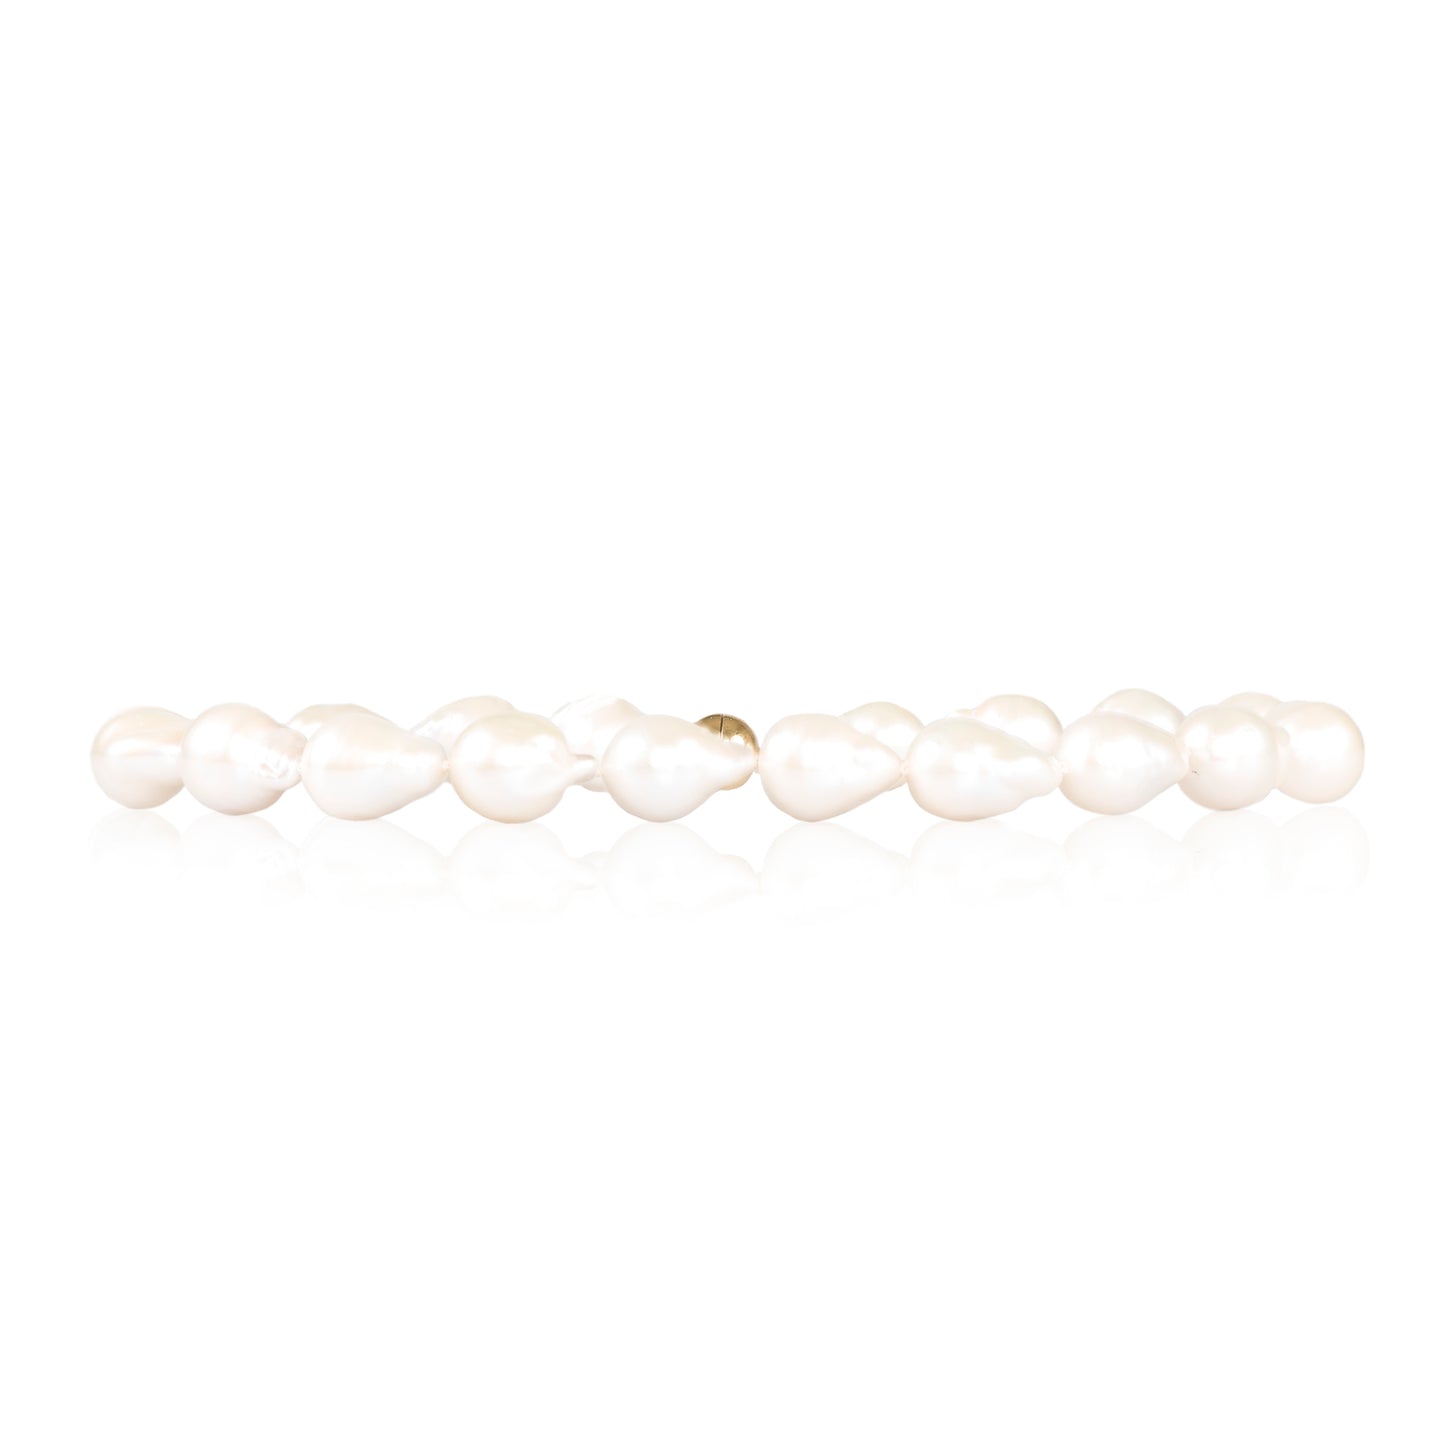 Baroque White Pearl Chocker with an 18ct yellow gold magnetic clasp by McFarlane Fine Jewellery